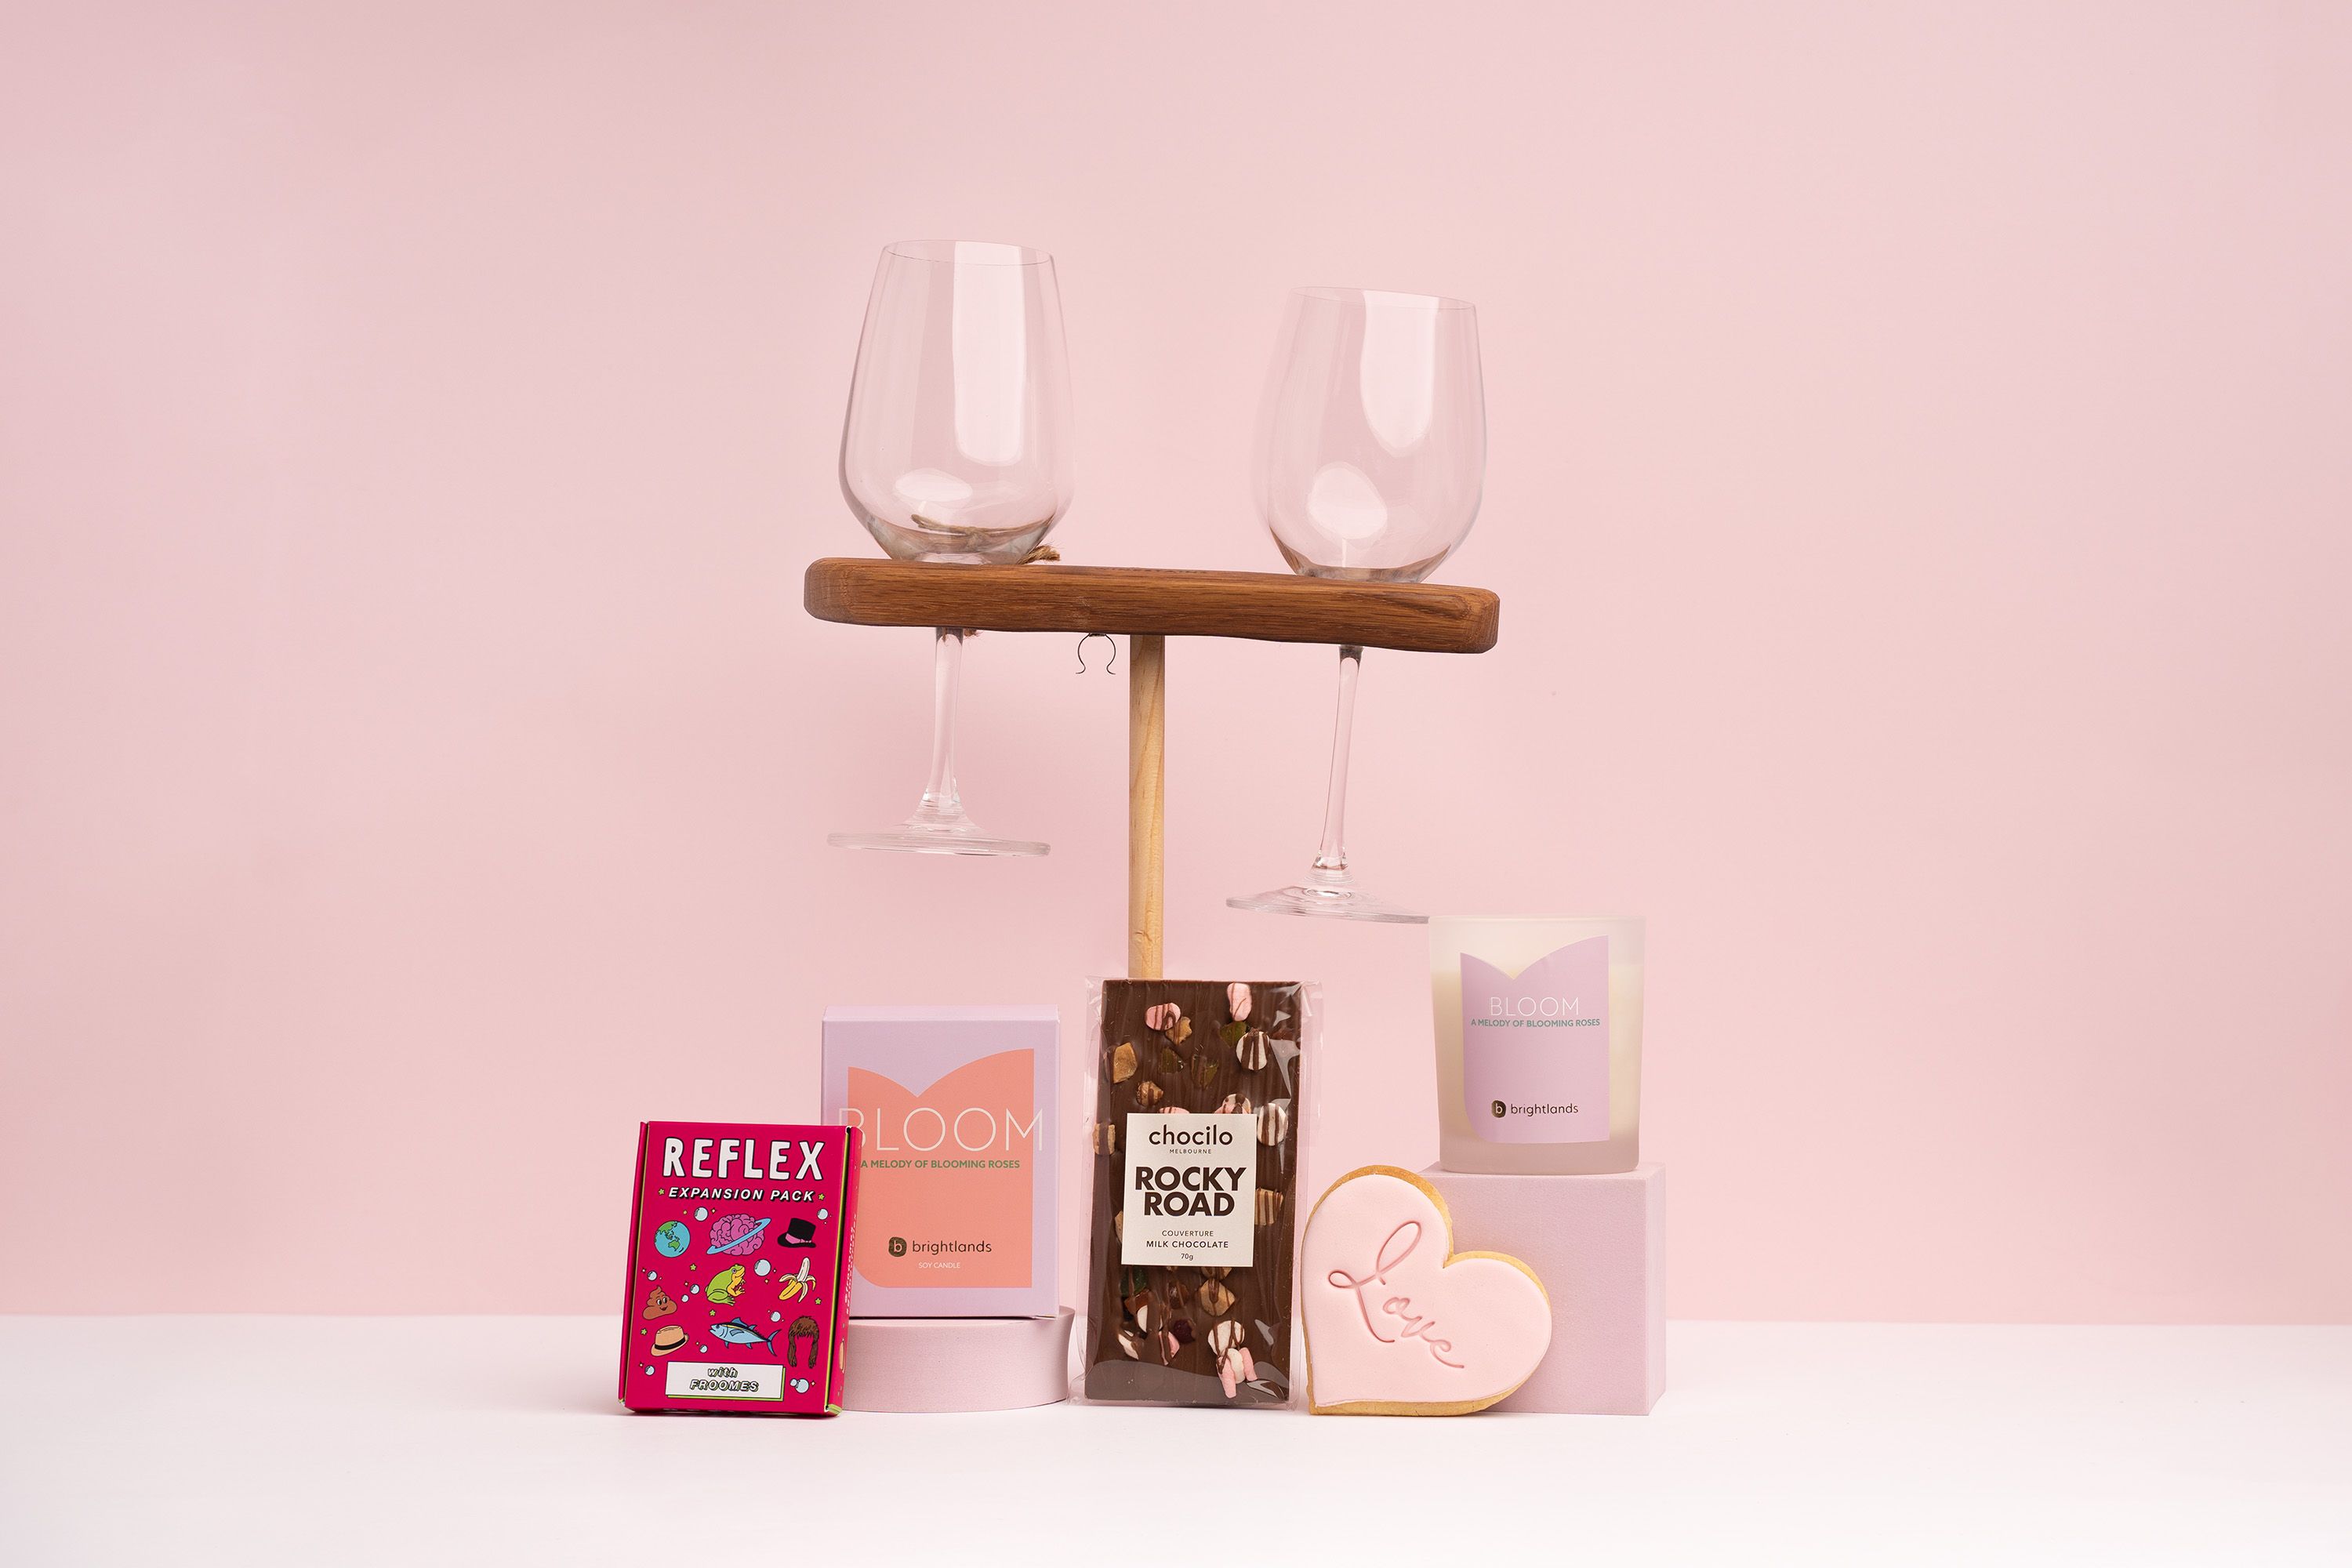 range of add-ons to go in a gift box with a rocky road bar, scented candle, connection cards, wine glass picnic stake and love cookie